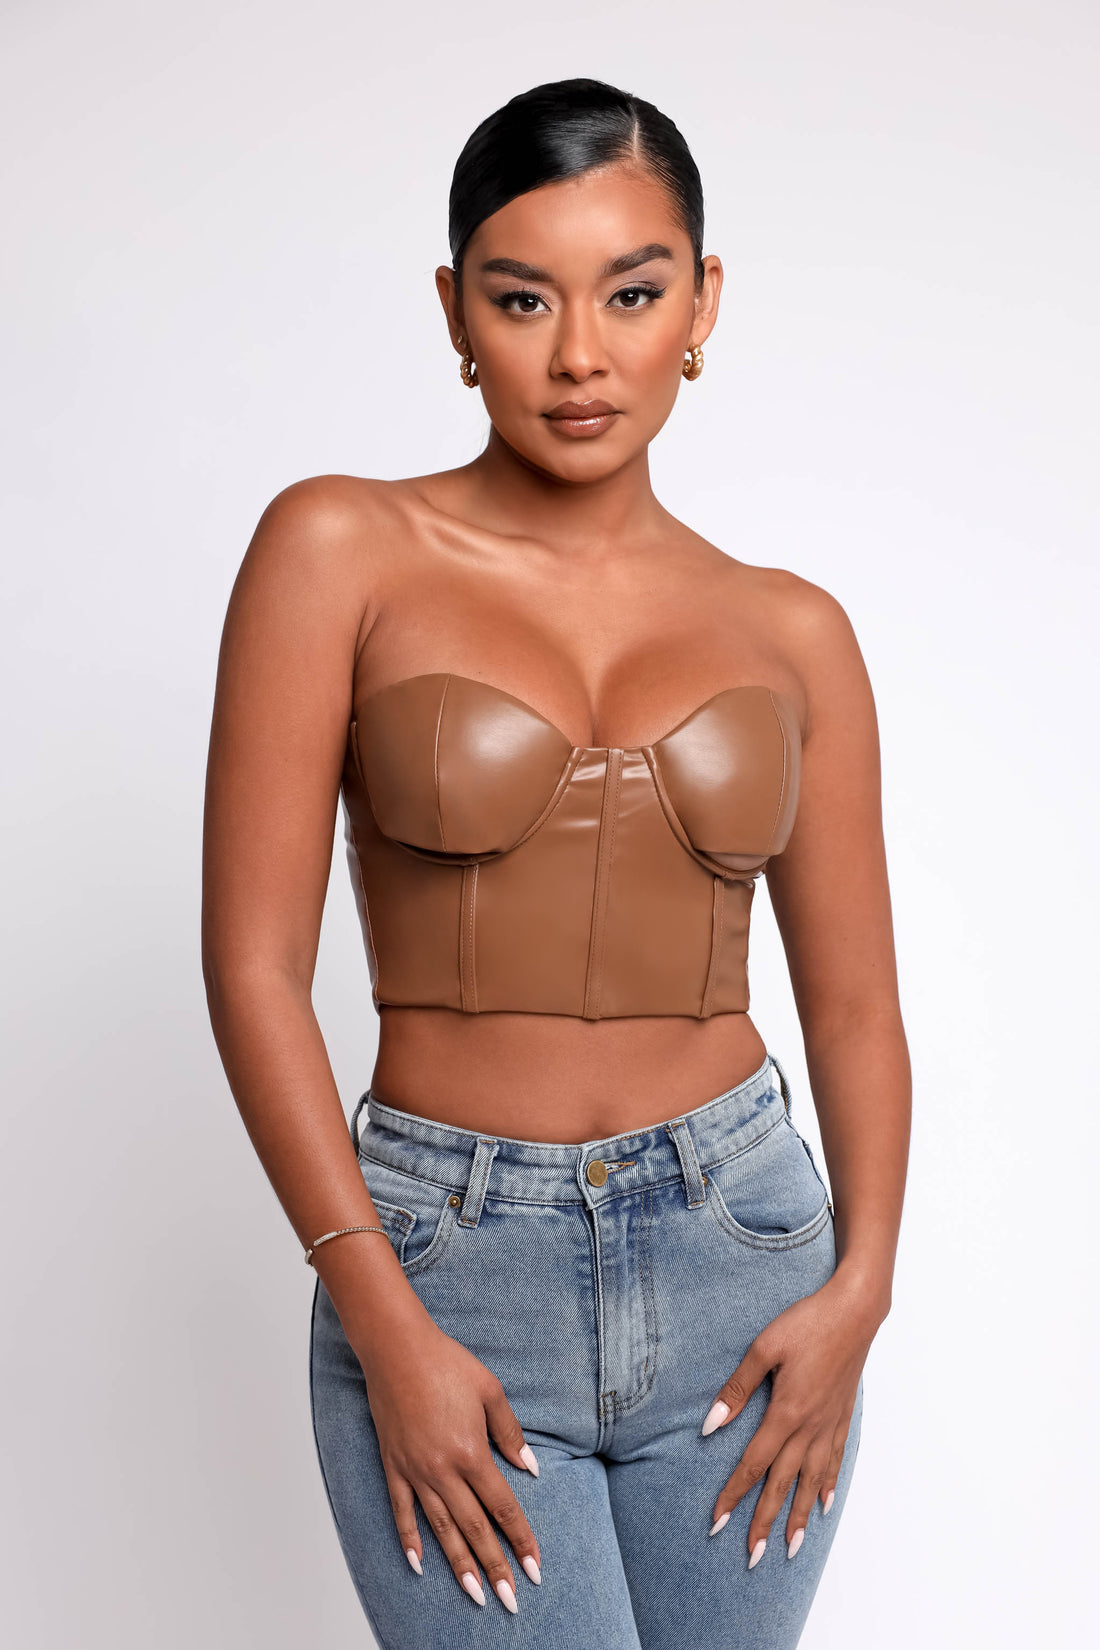 Purchase Wholesale brown leather corset tops. Free Returns & Net